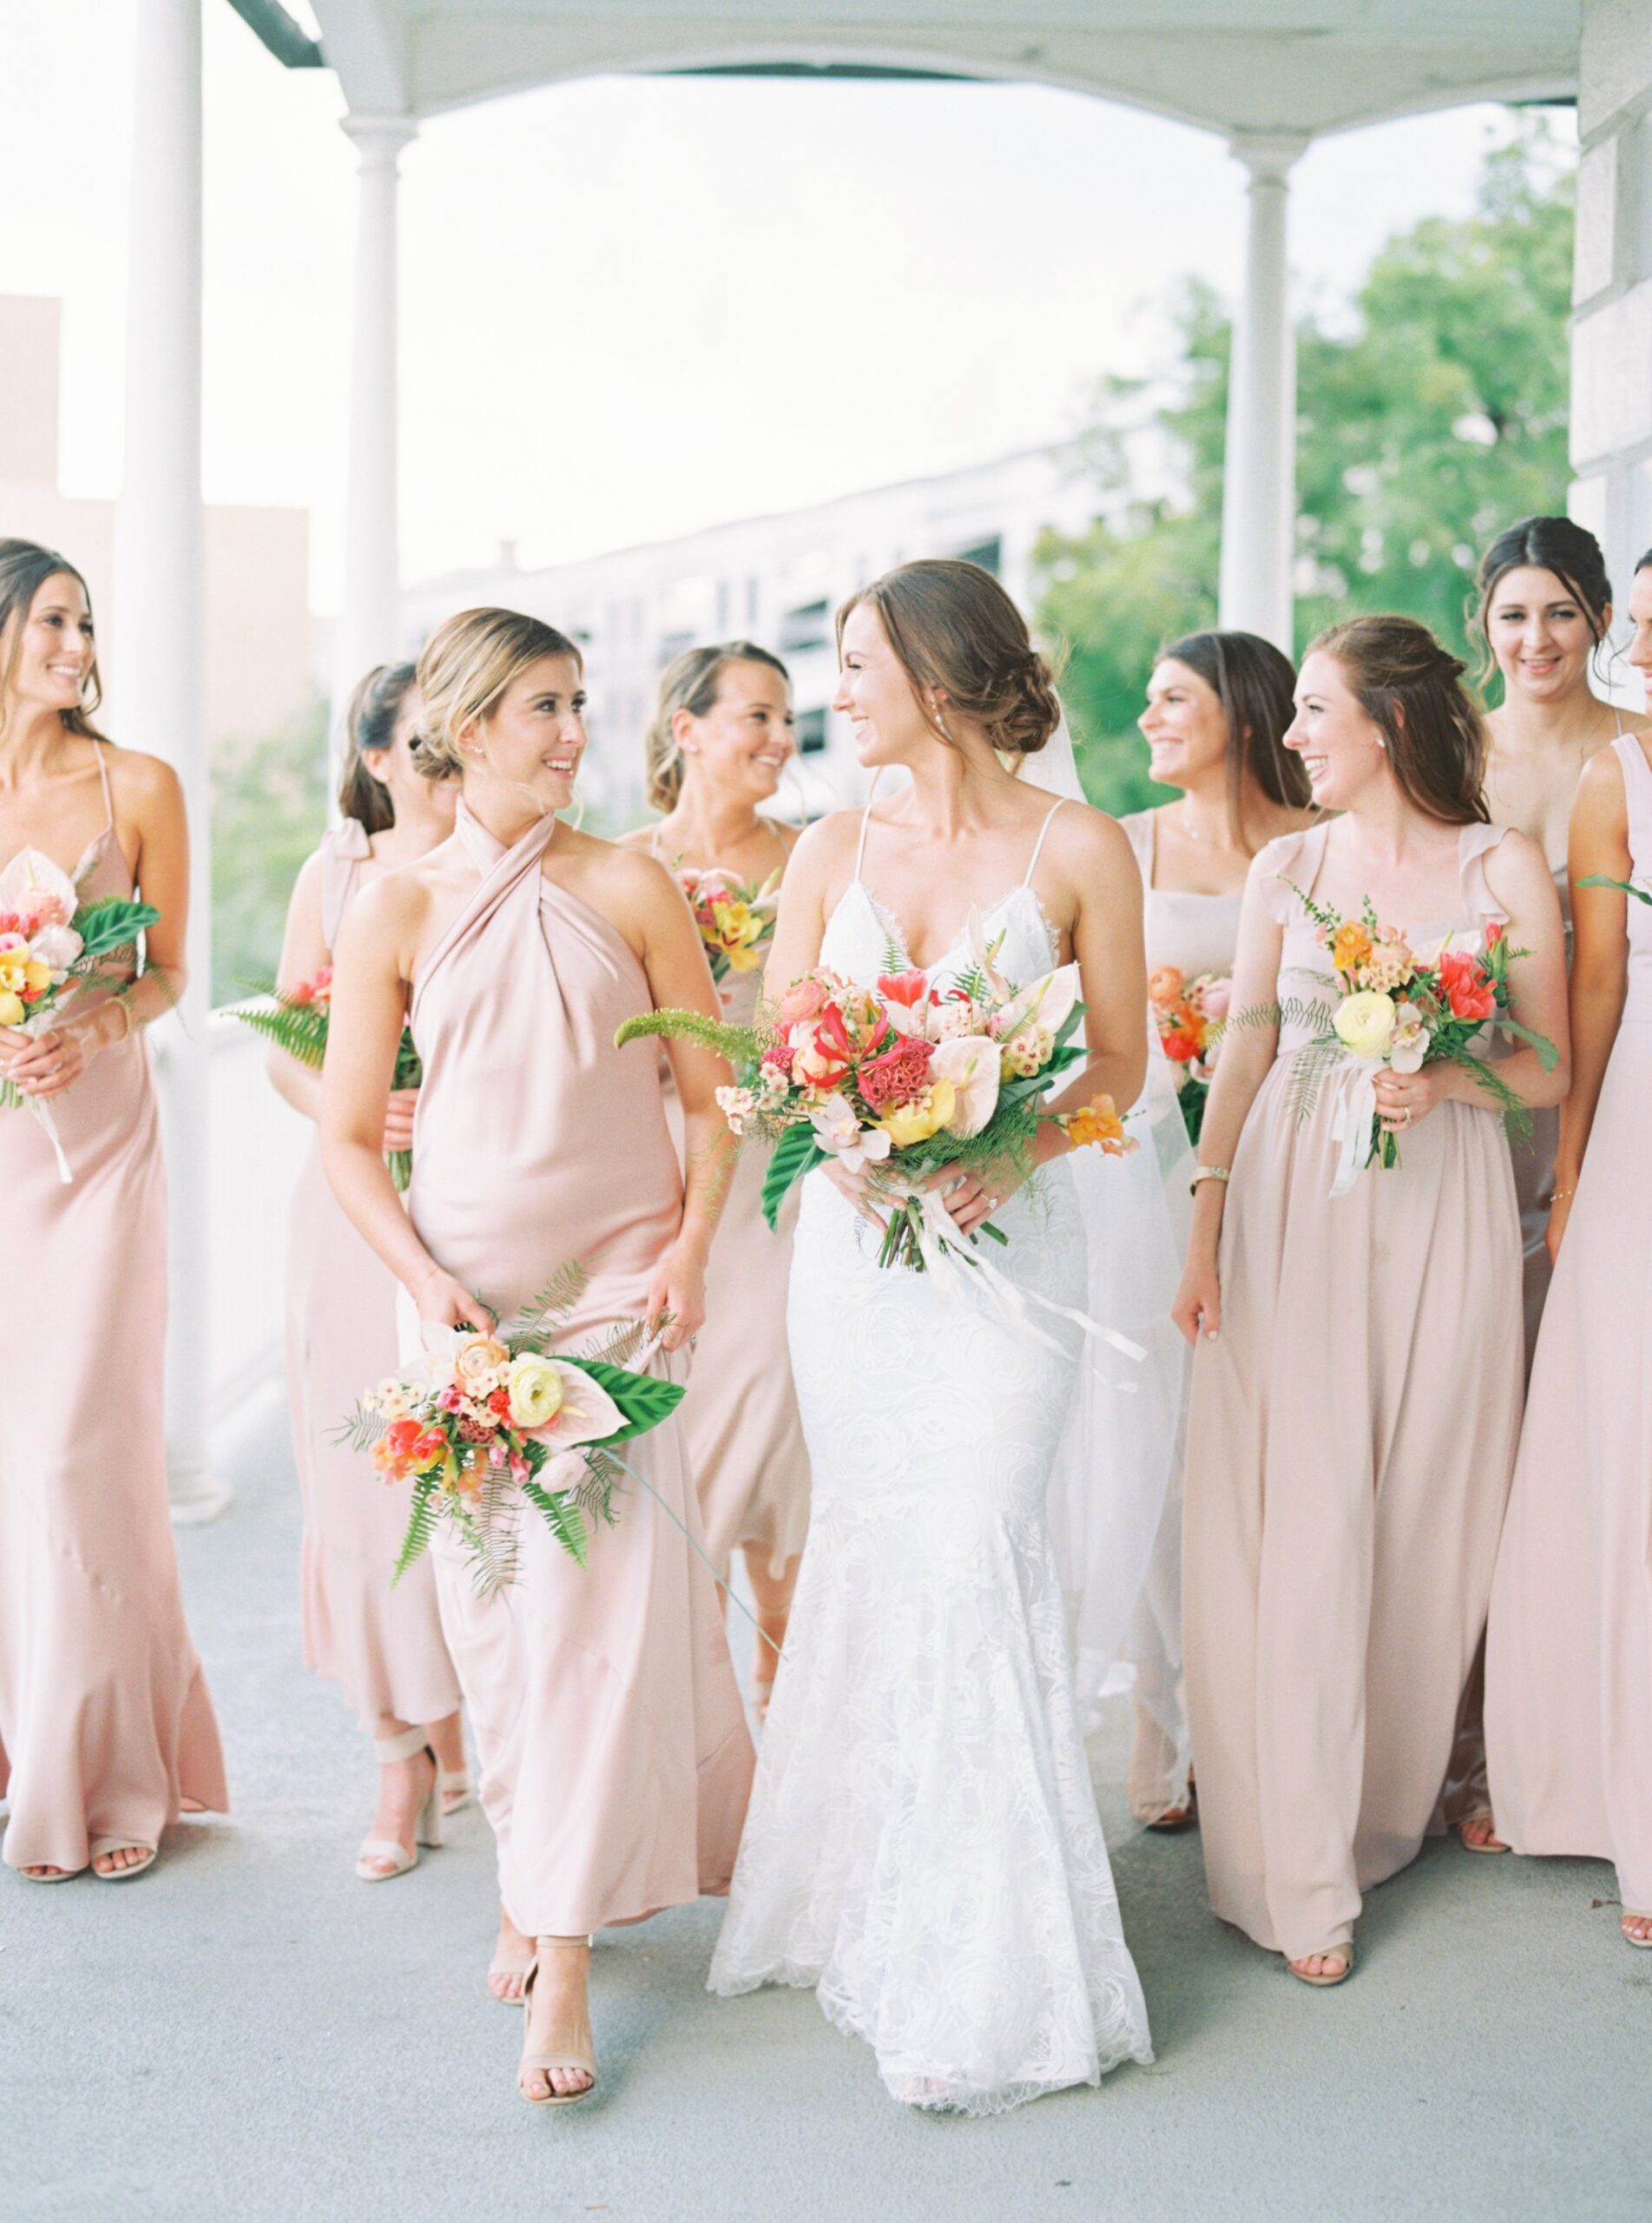 Bride walks with bridesmaids on the porch at Gadsden House.